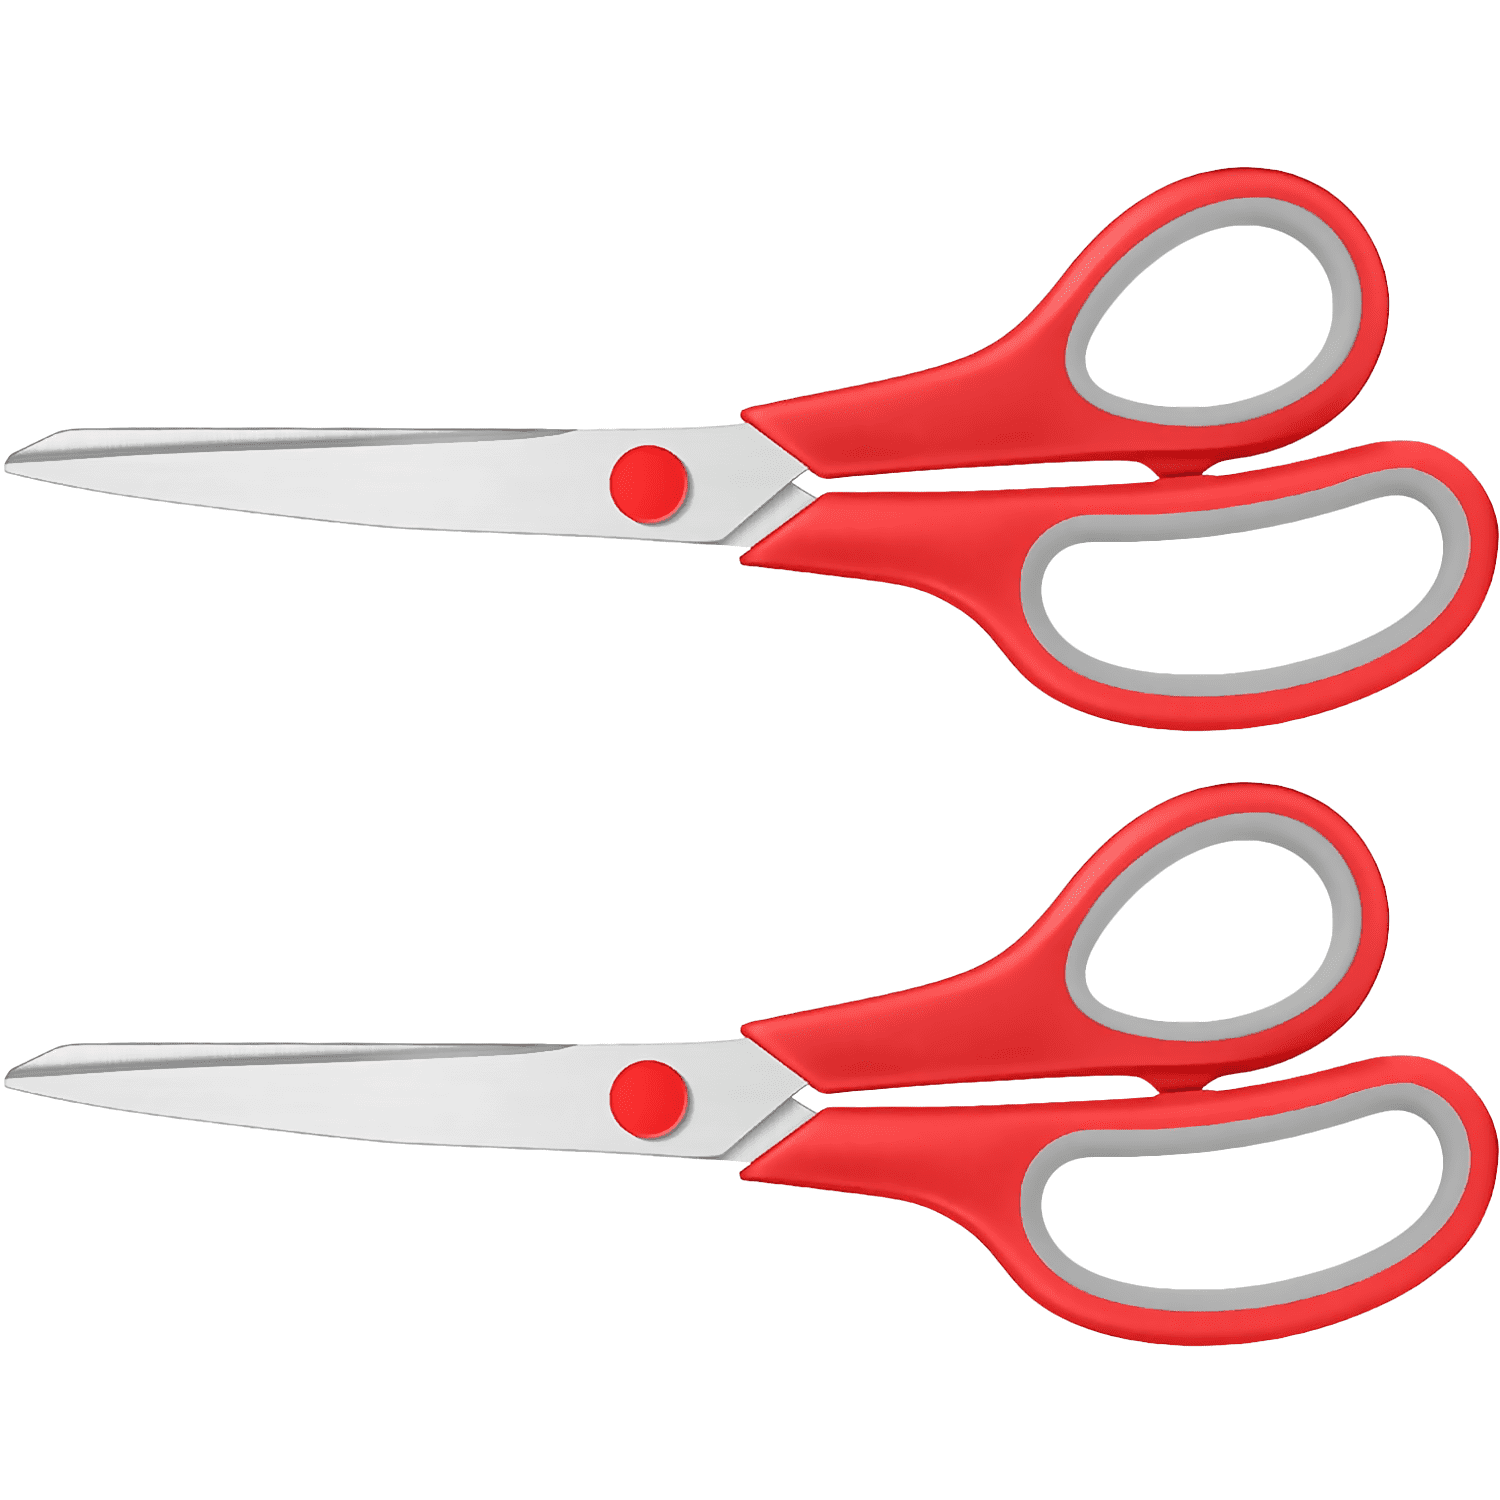 Beaditive Multipurpose Craft Scissors - High-Leverage with Sharp Carbon  Steel Blades - Ergonomic Sewing Scissors for Heavy Duty Projects - Office